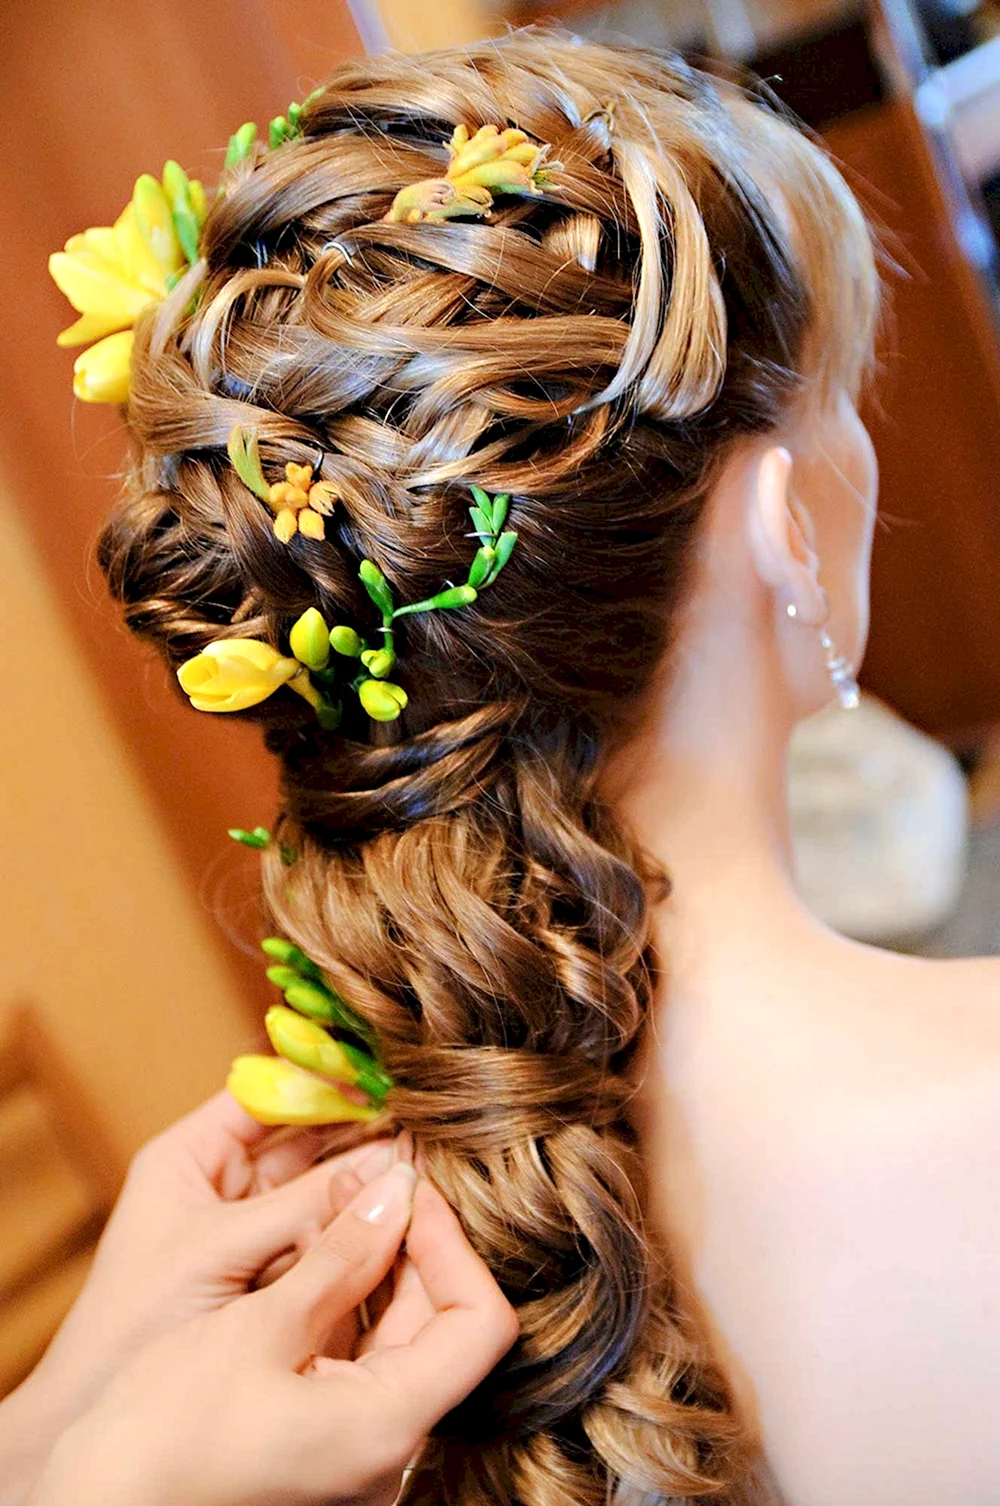 2. Simple Braid with Flowers